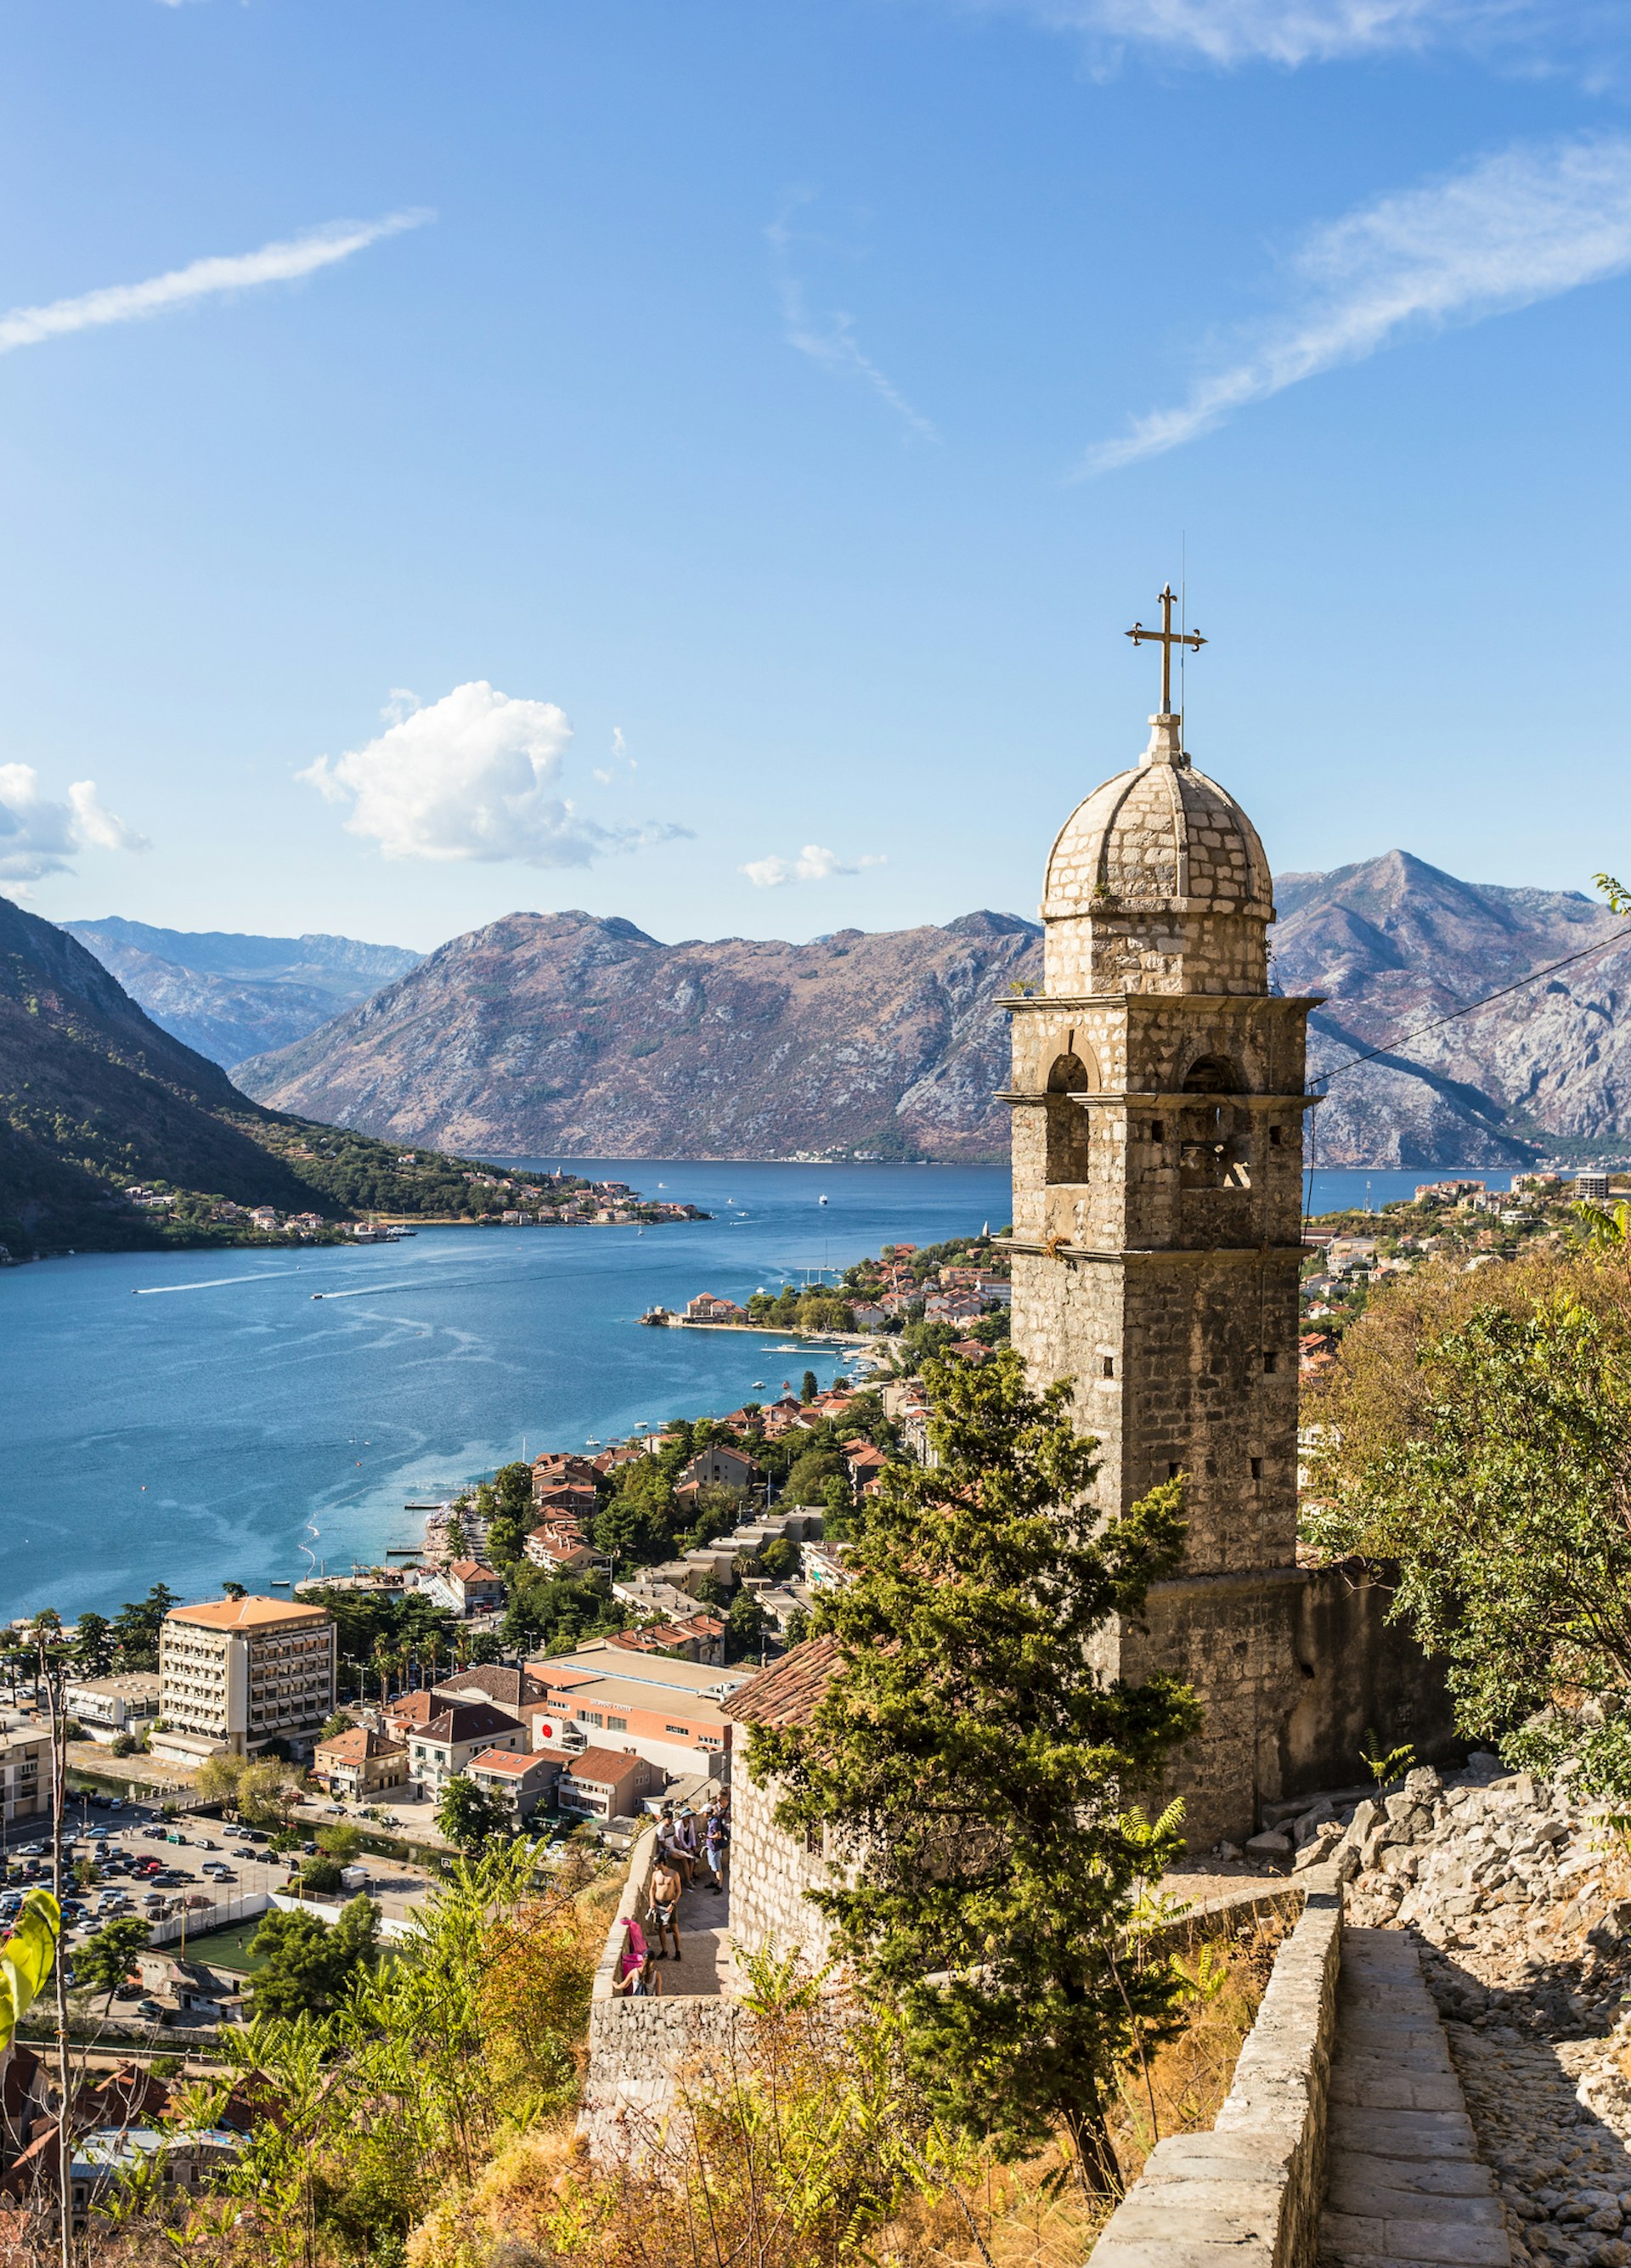 A panoramic view of Kotor's Old Town, Montenegro